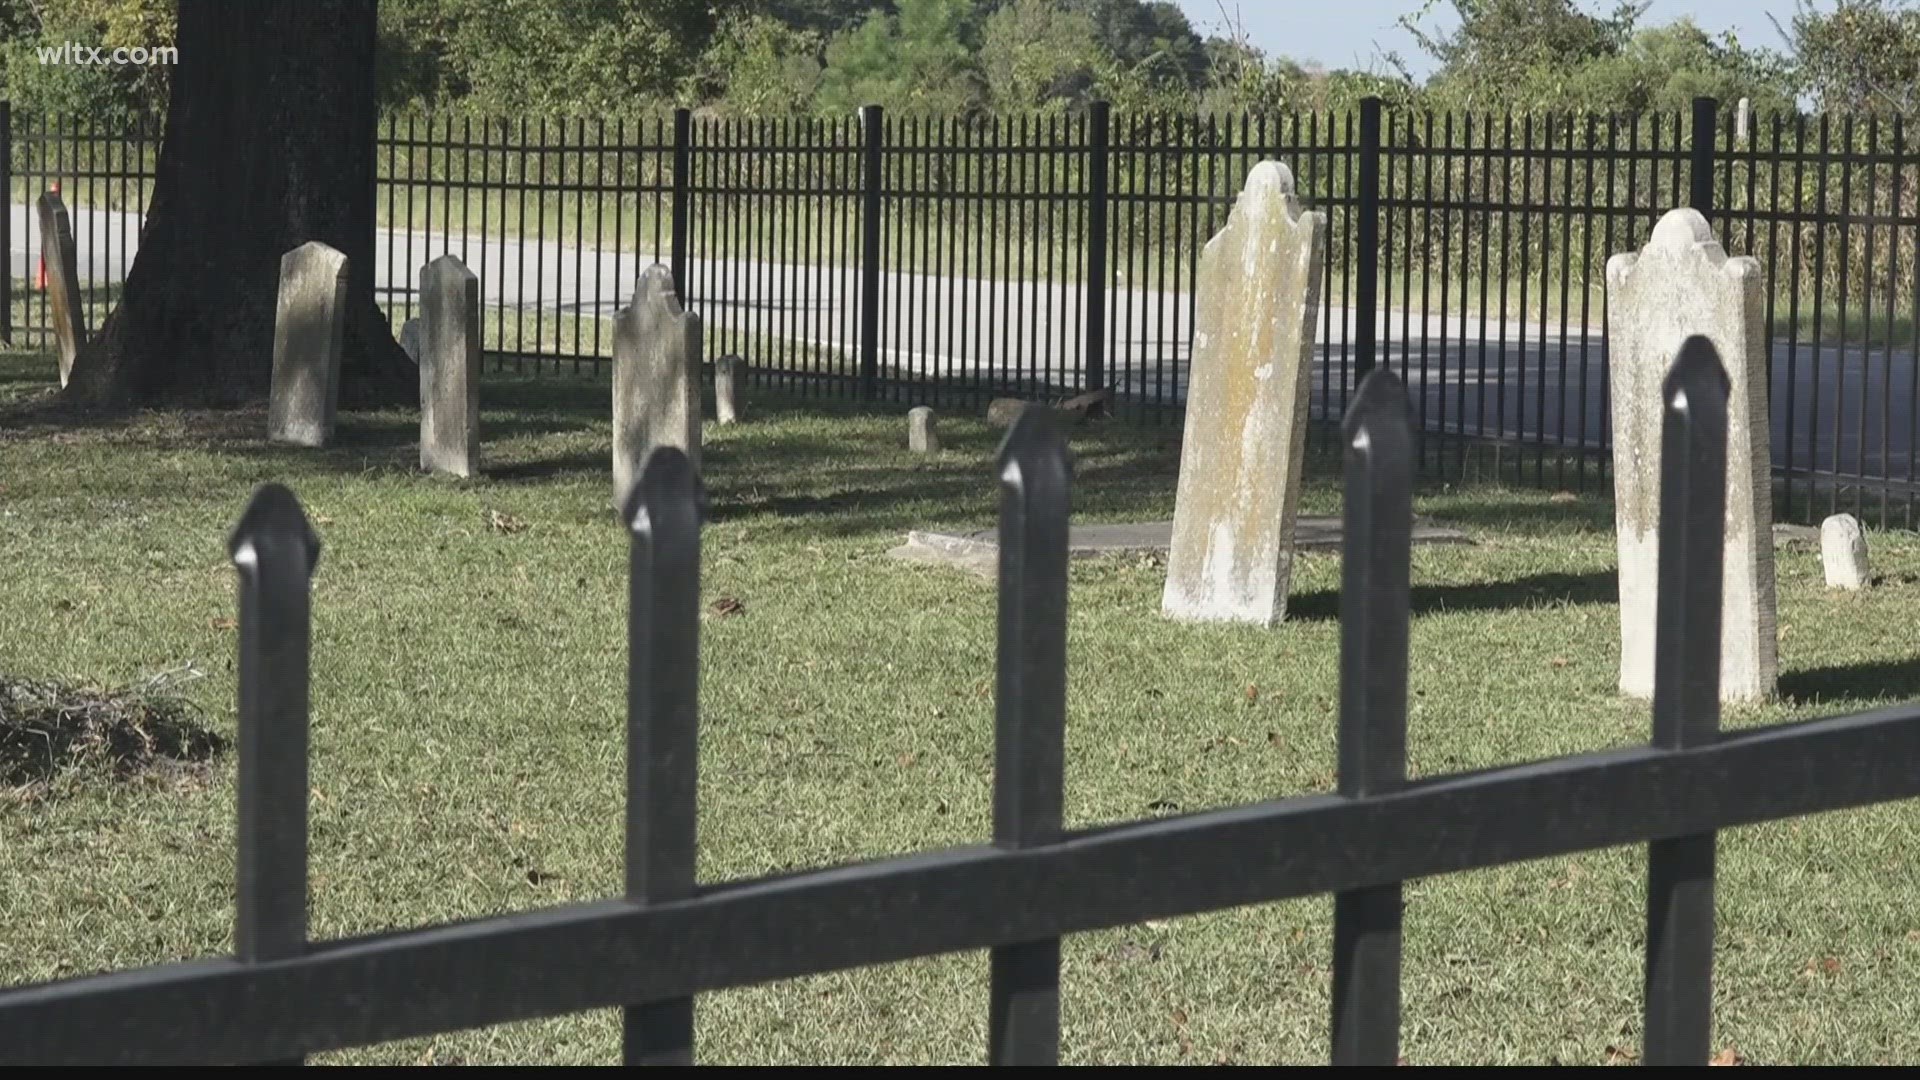 The city is putting $30K toward restoring cemeteries in the city that have ties to the Black community.